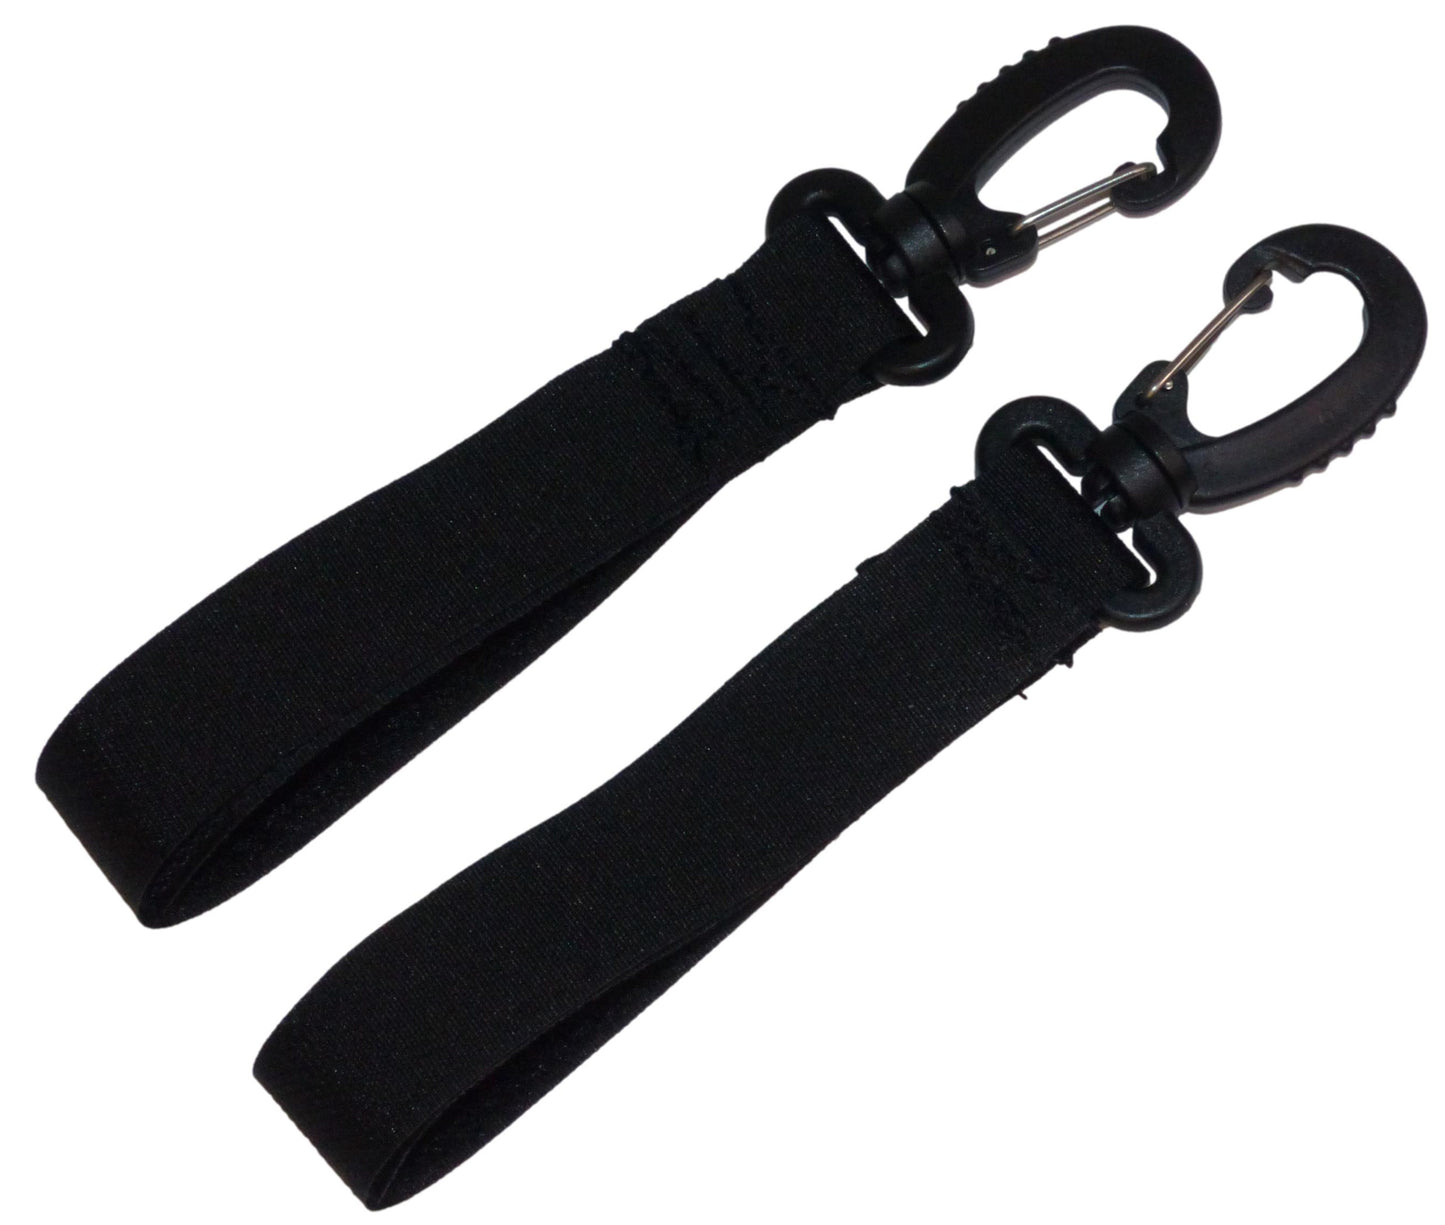 Benristraps 25mm Hook & Loop Hanging Strap with Snap Buckle (Pair), black, small